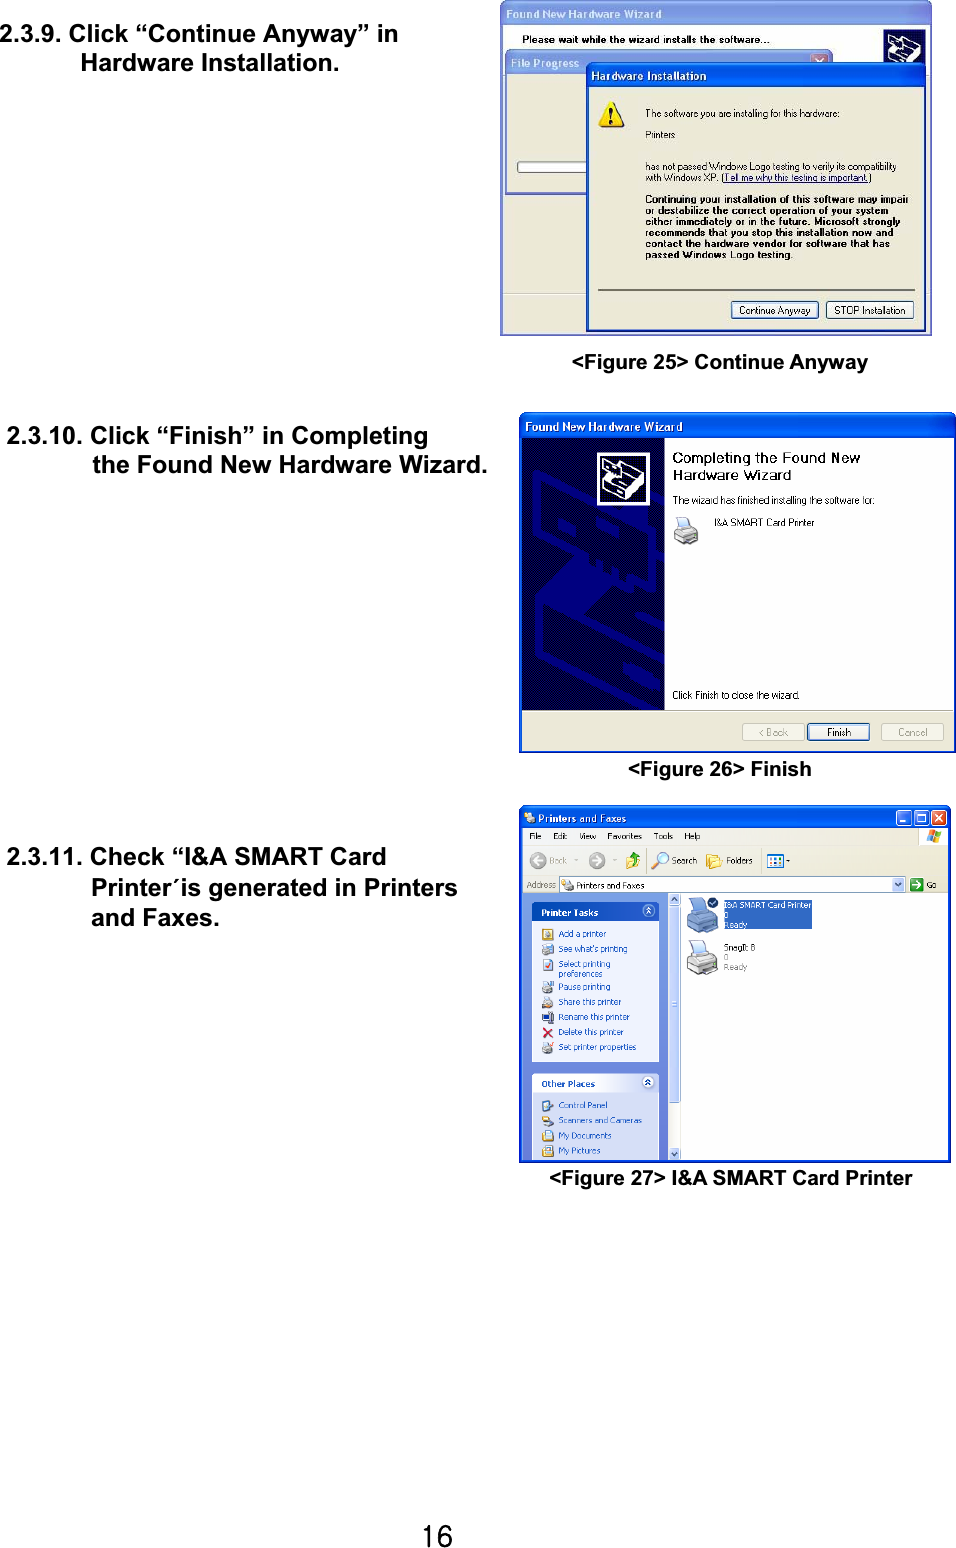 X]G2.3.9. Click “Continue Anyway” in         Hardware Installation. 2.3.10. Click “Finish” in Completing        the Found New Hardware Wizard.                                                                   2.3.11. Check “I&amp;A SMART Card  Printerºis generated in Printers  and Faxes.&lt;Figure 25&gt; Continue Anyway &lt;Figure 26&gt; Finish &lt;Figure 27&gt; I&amp;A SMART Card Printer 